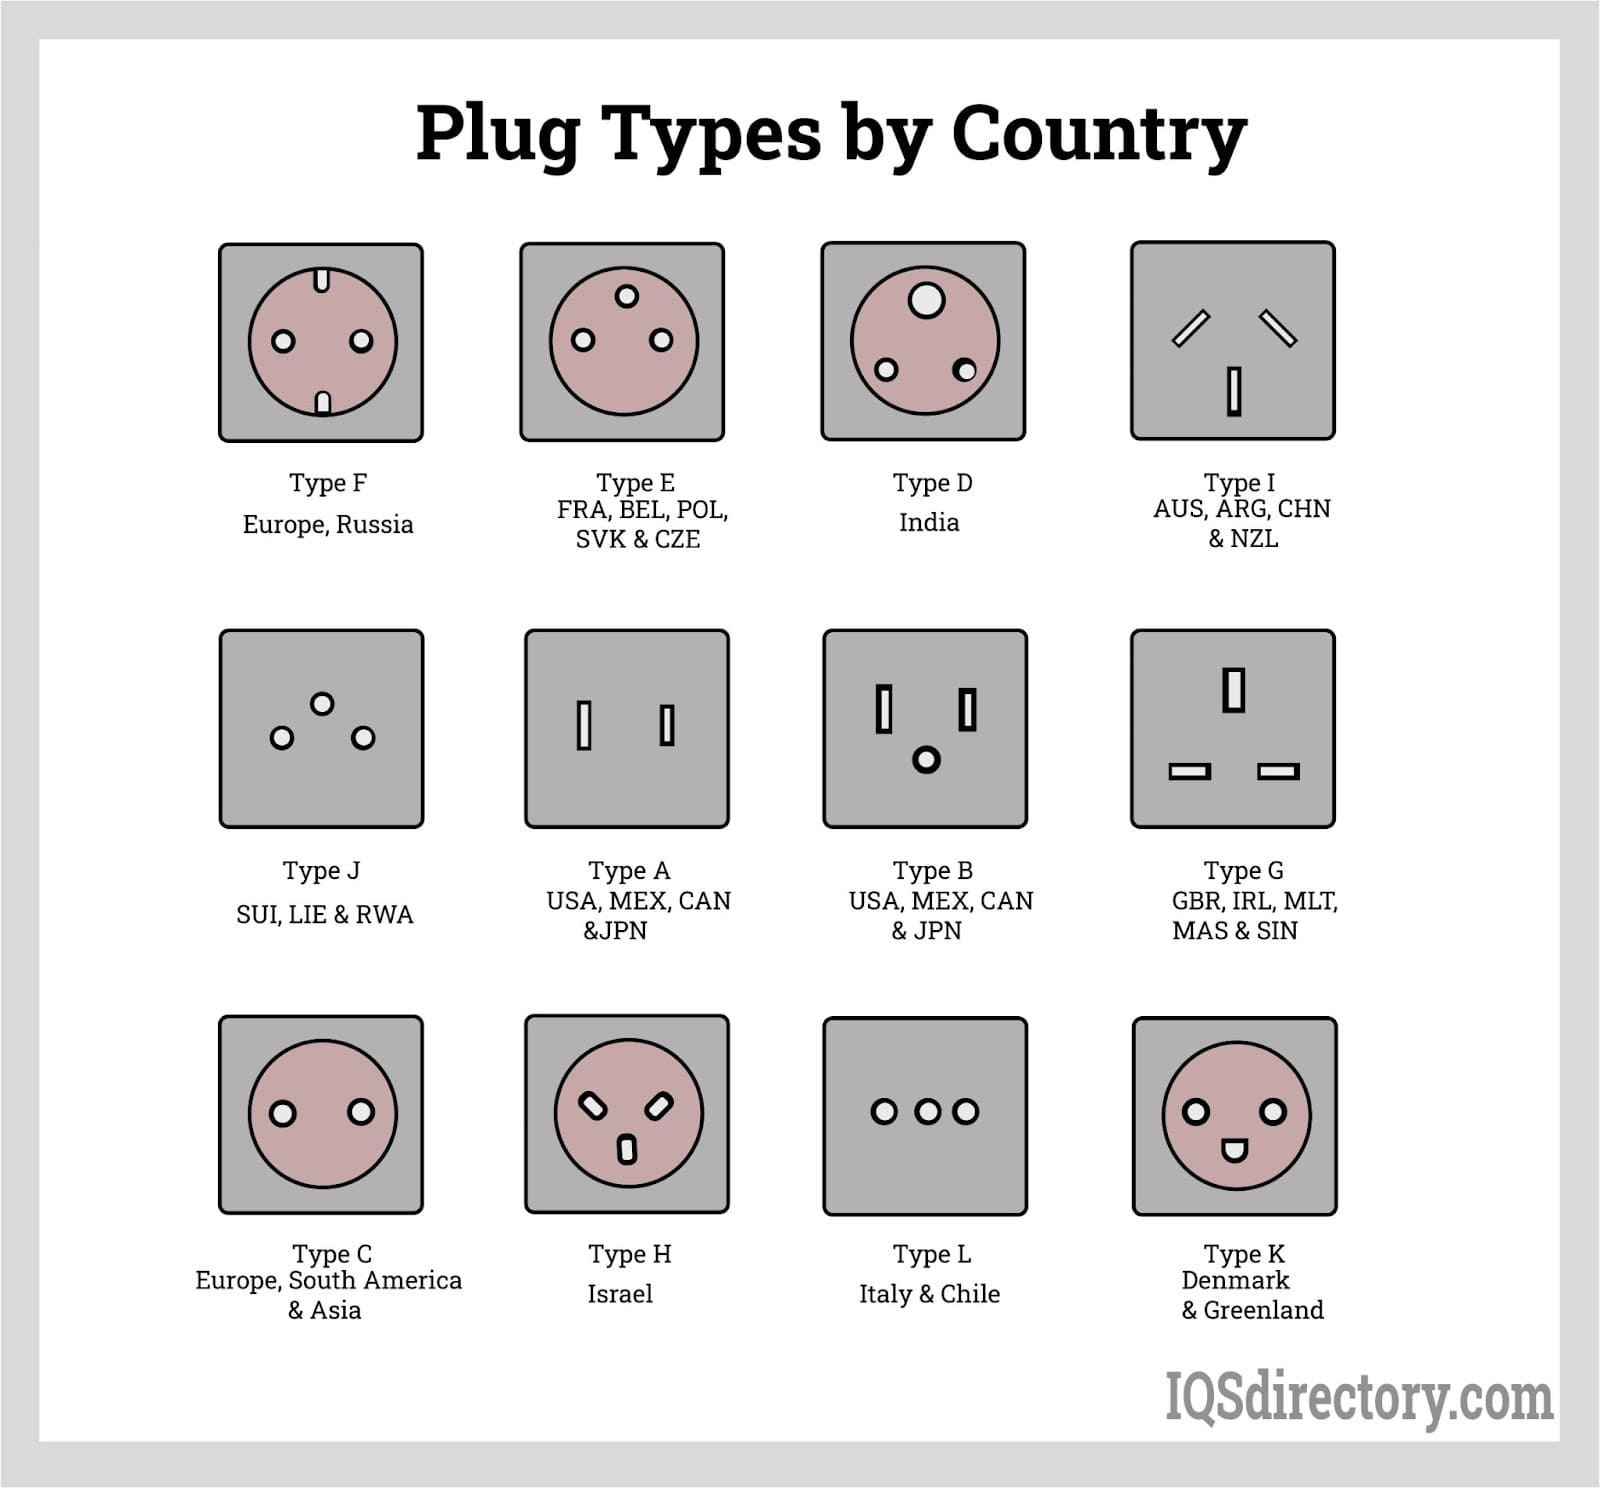 https://www.iqsdirectory.com/articles/power-cord/electrical-plugs/plug-types-by-country.jpg